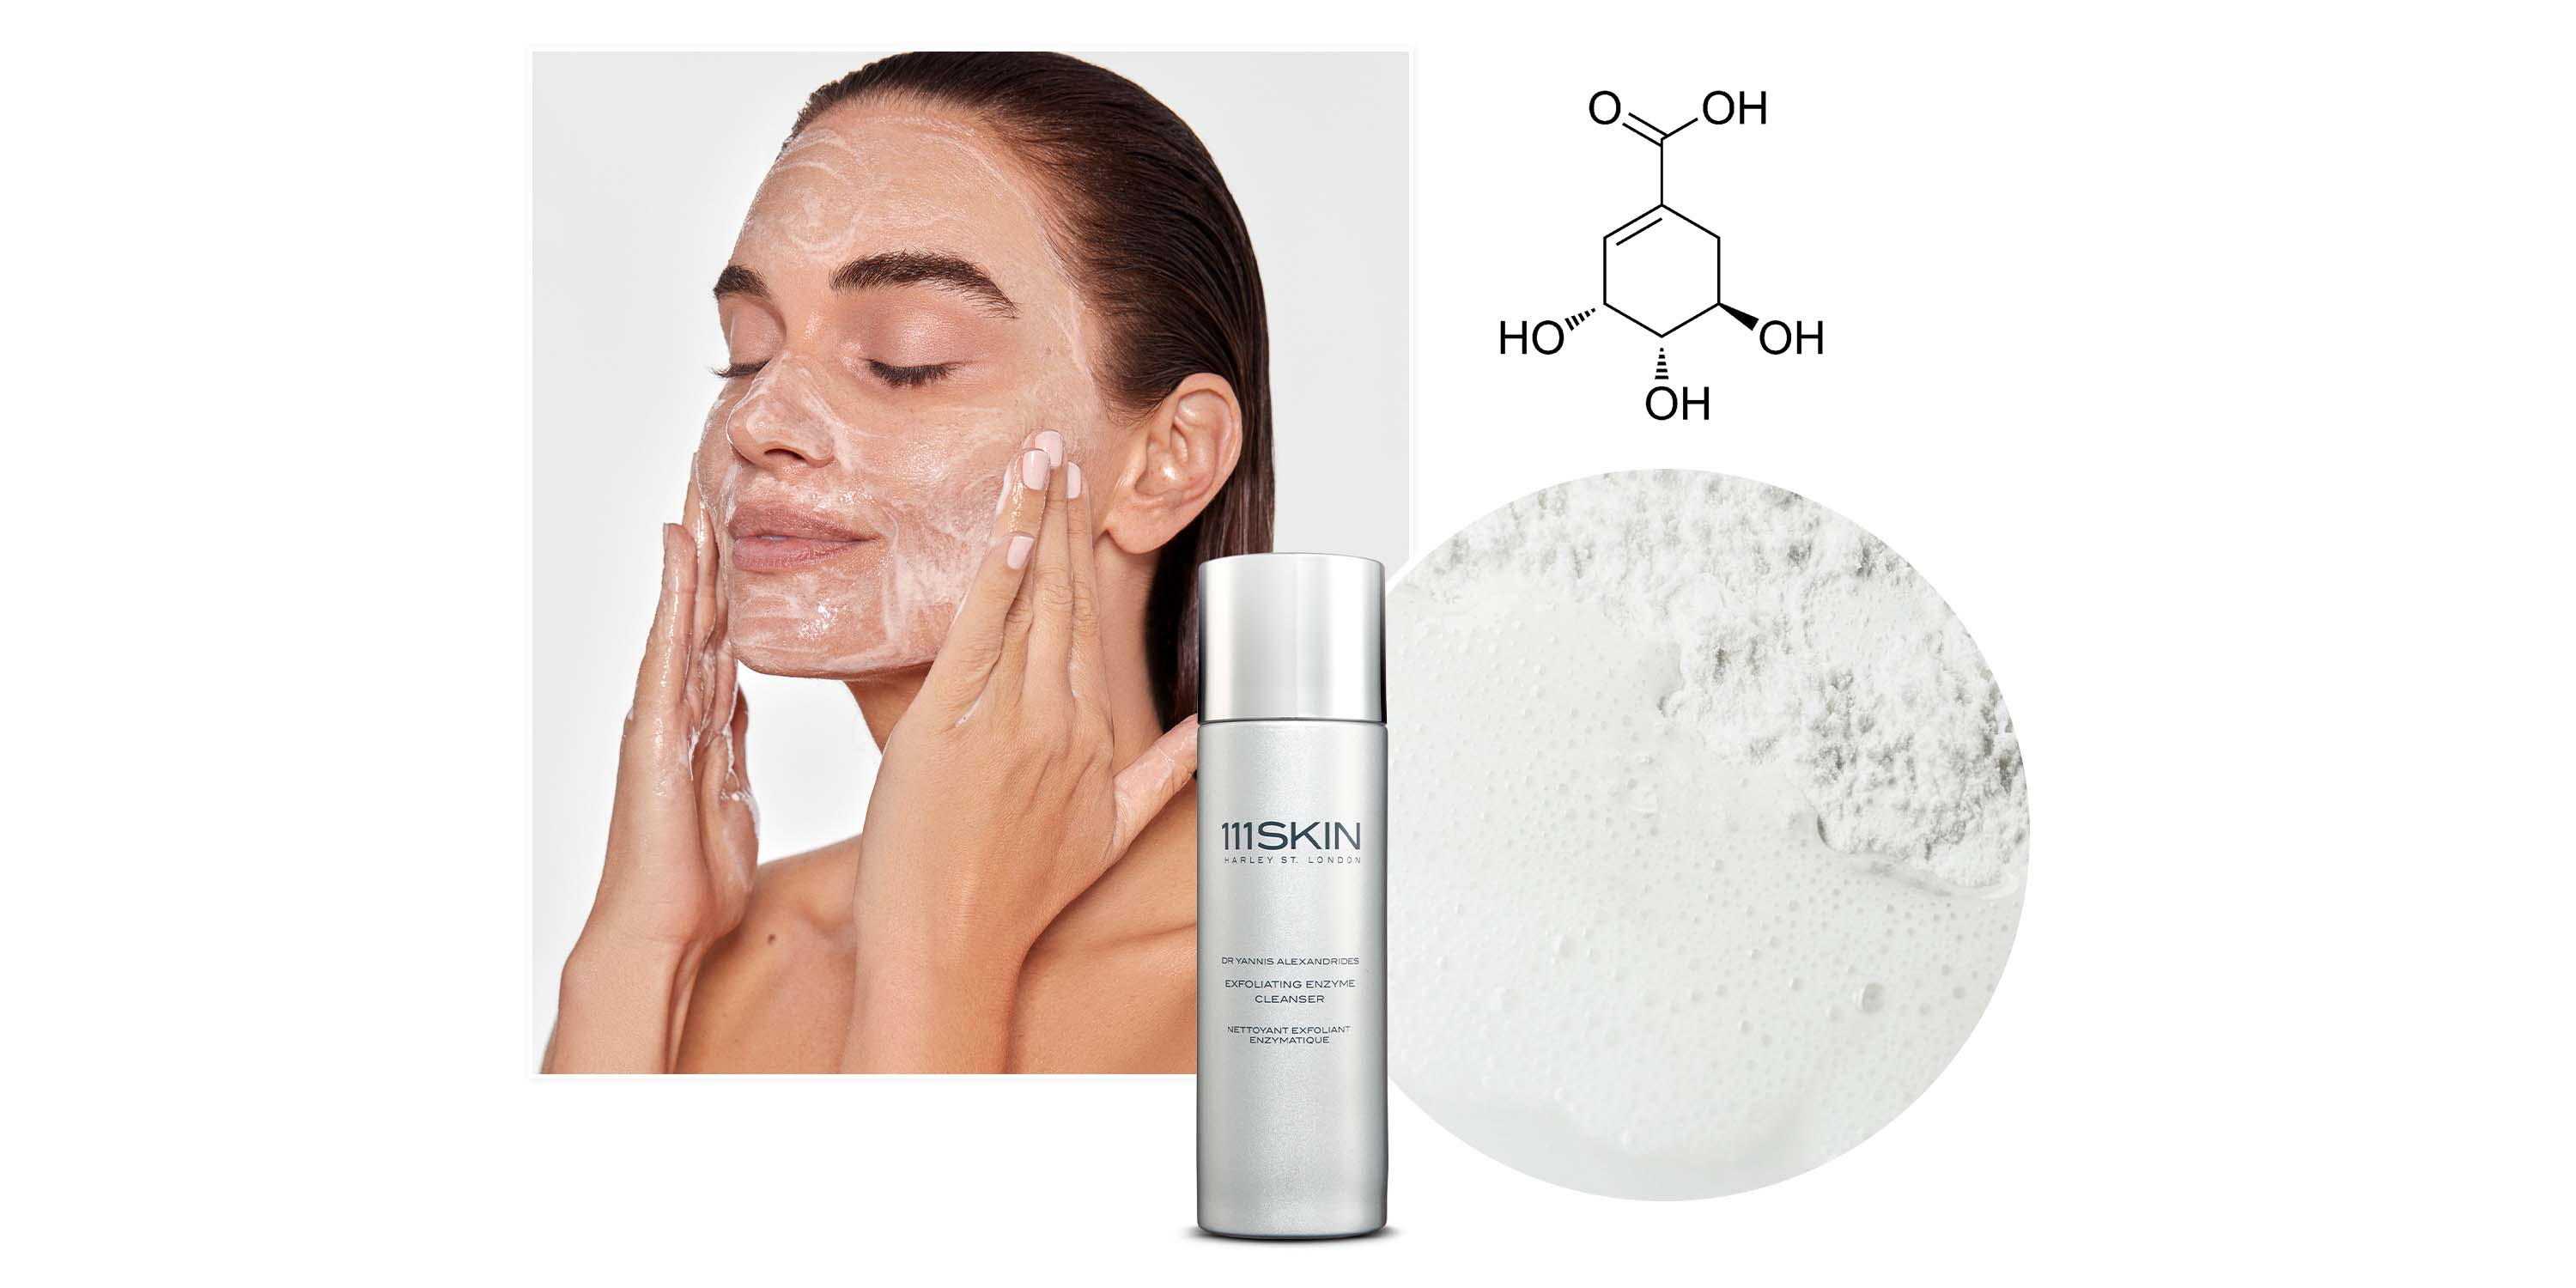 Shikimic Acid: the hero ingredient behind our new Exfoliating Enzyme Cleanser